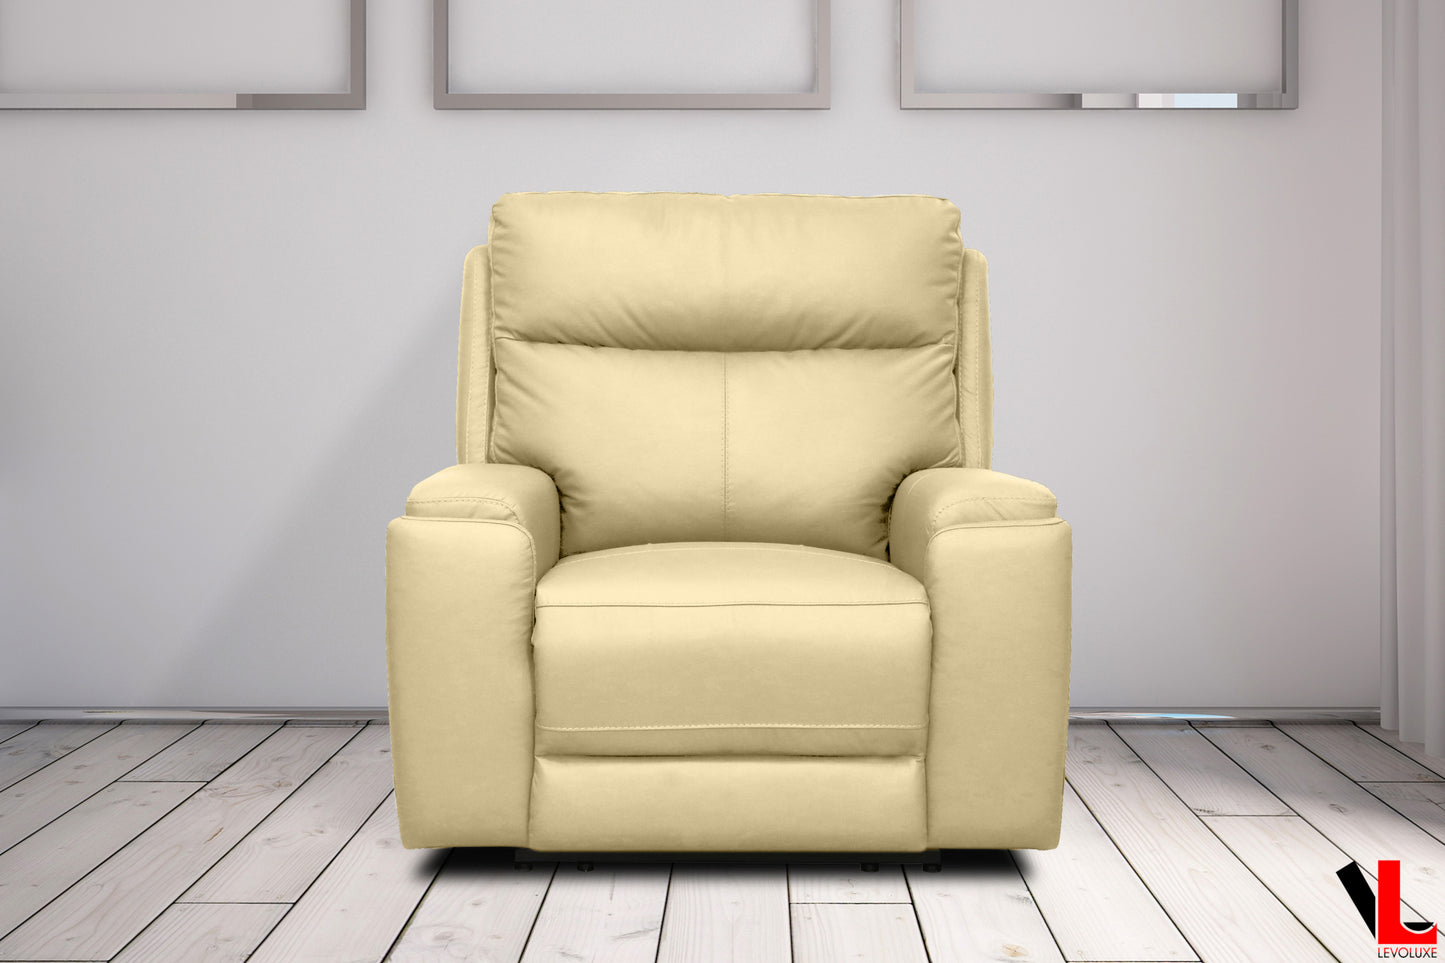 Arlo 41.3" Power Reclining Chair with Power Headrest in Leather Match - Available in 2 Colours